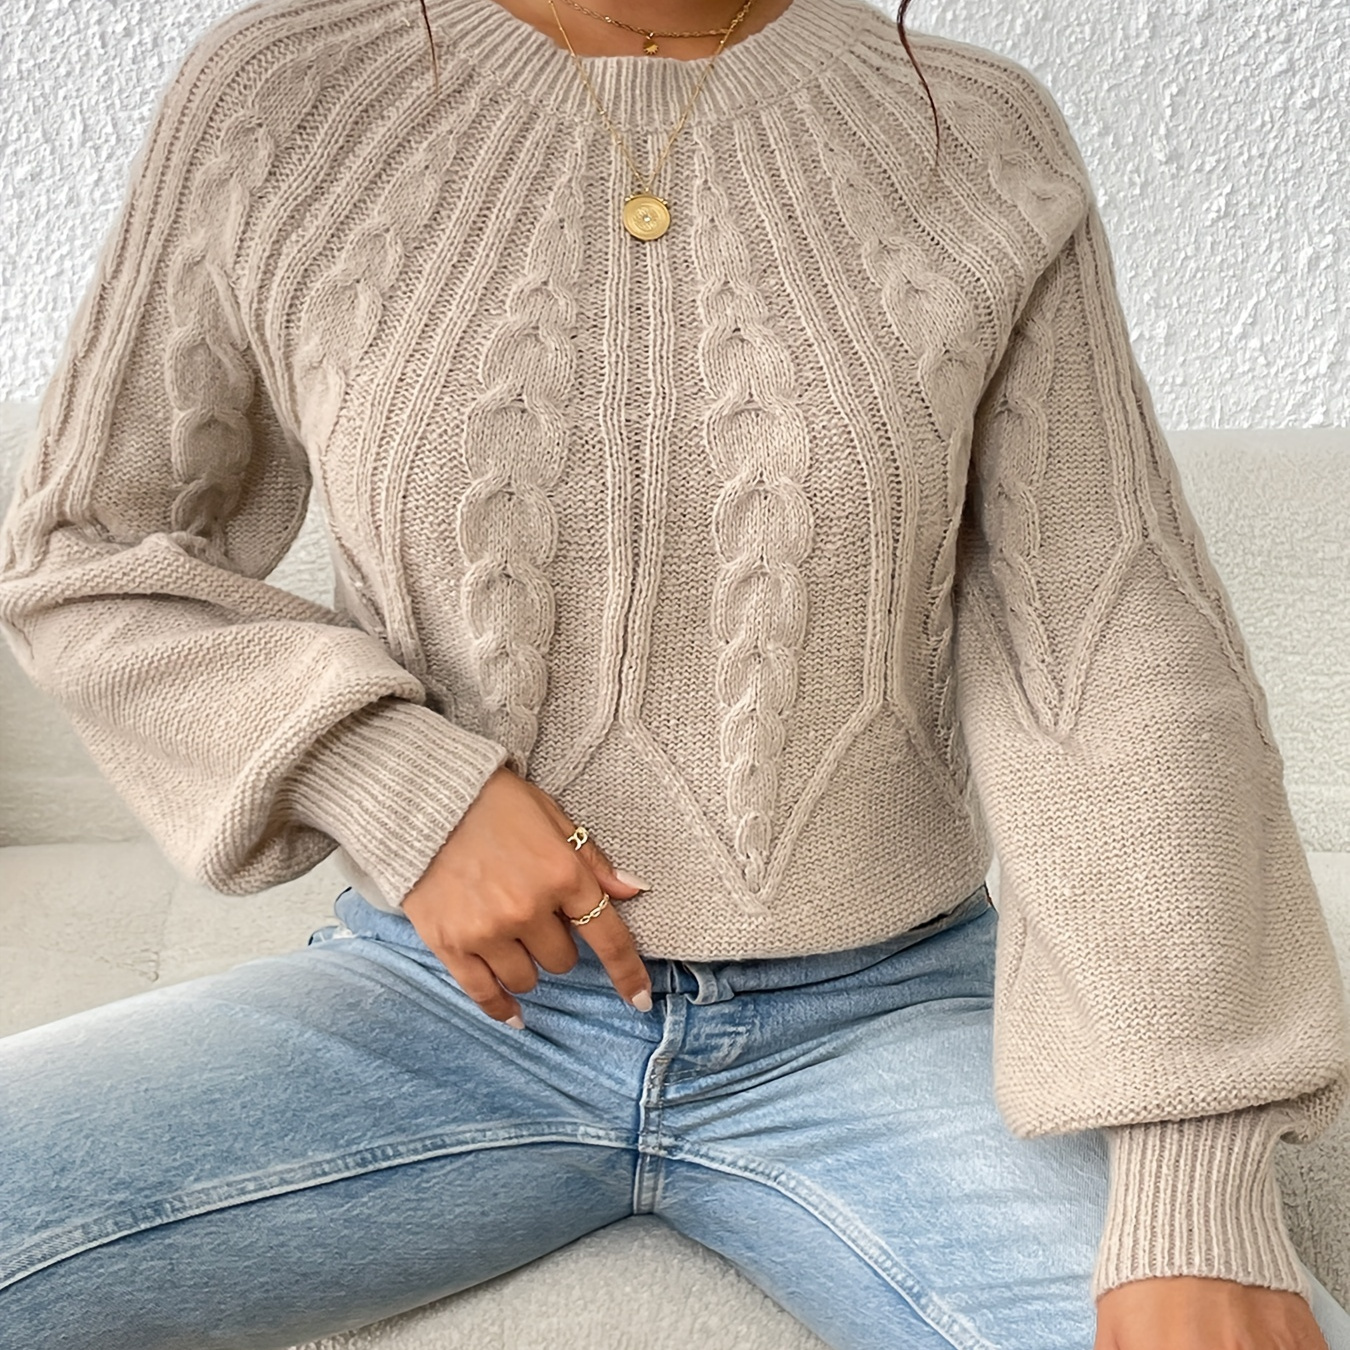 

Solid Crew Neck Pullover Sweater, Casual Lantern Sleeve Criss Ruffle Trim Knit Sweater For Fall & Winter, Women's Clothing